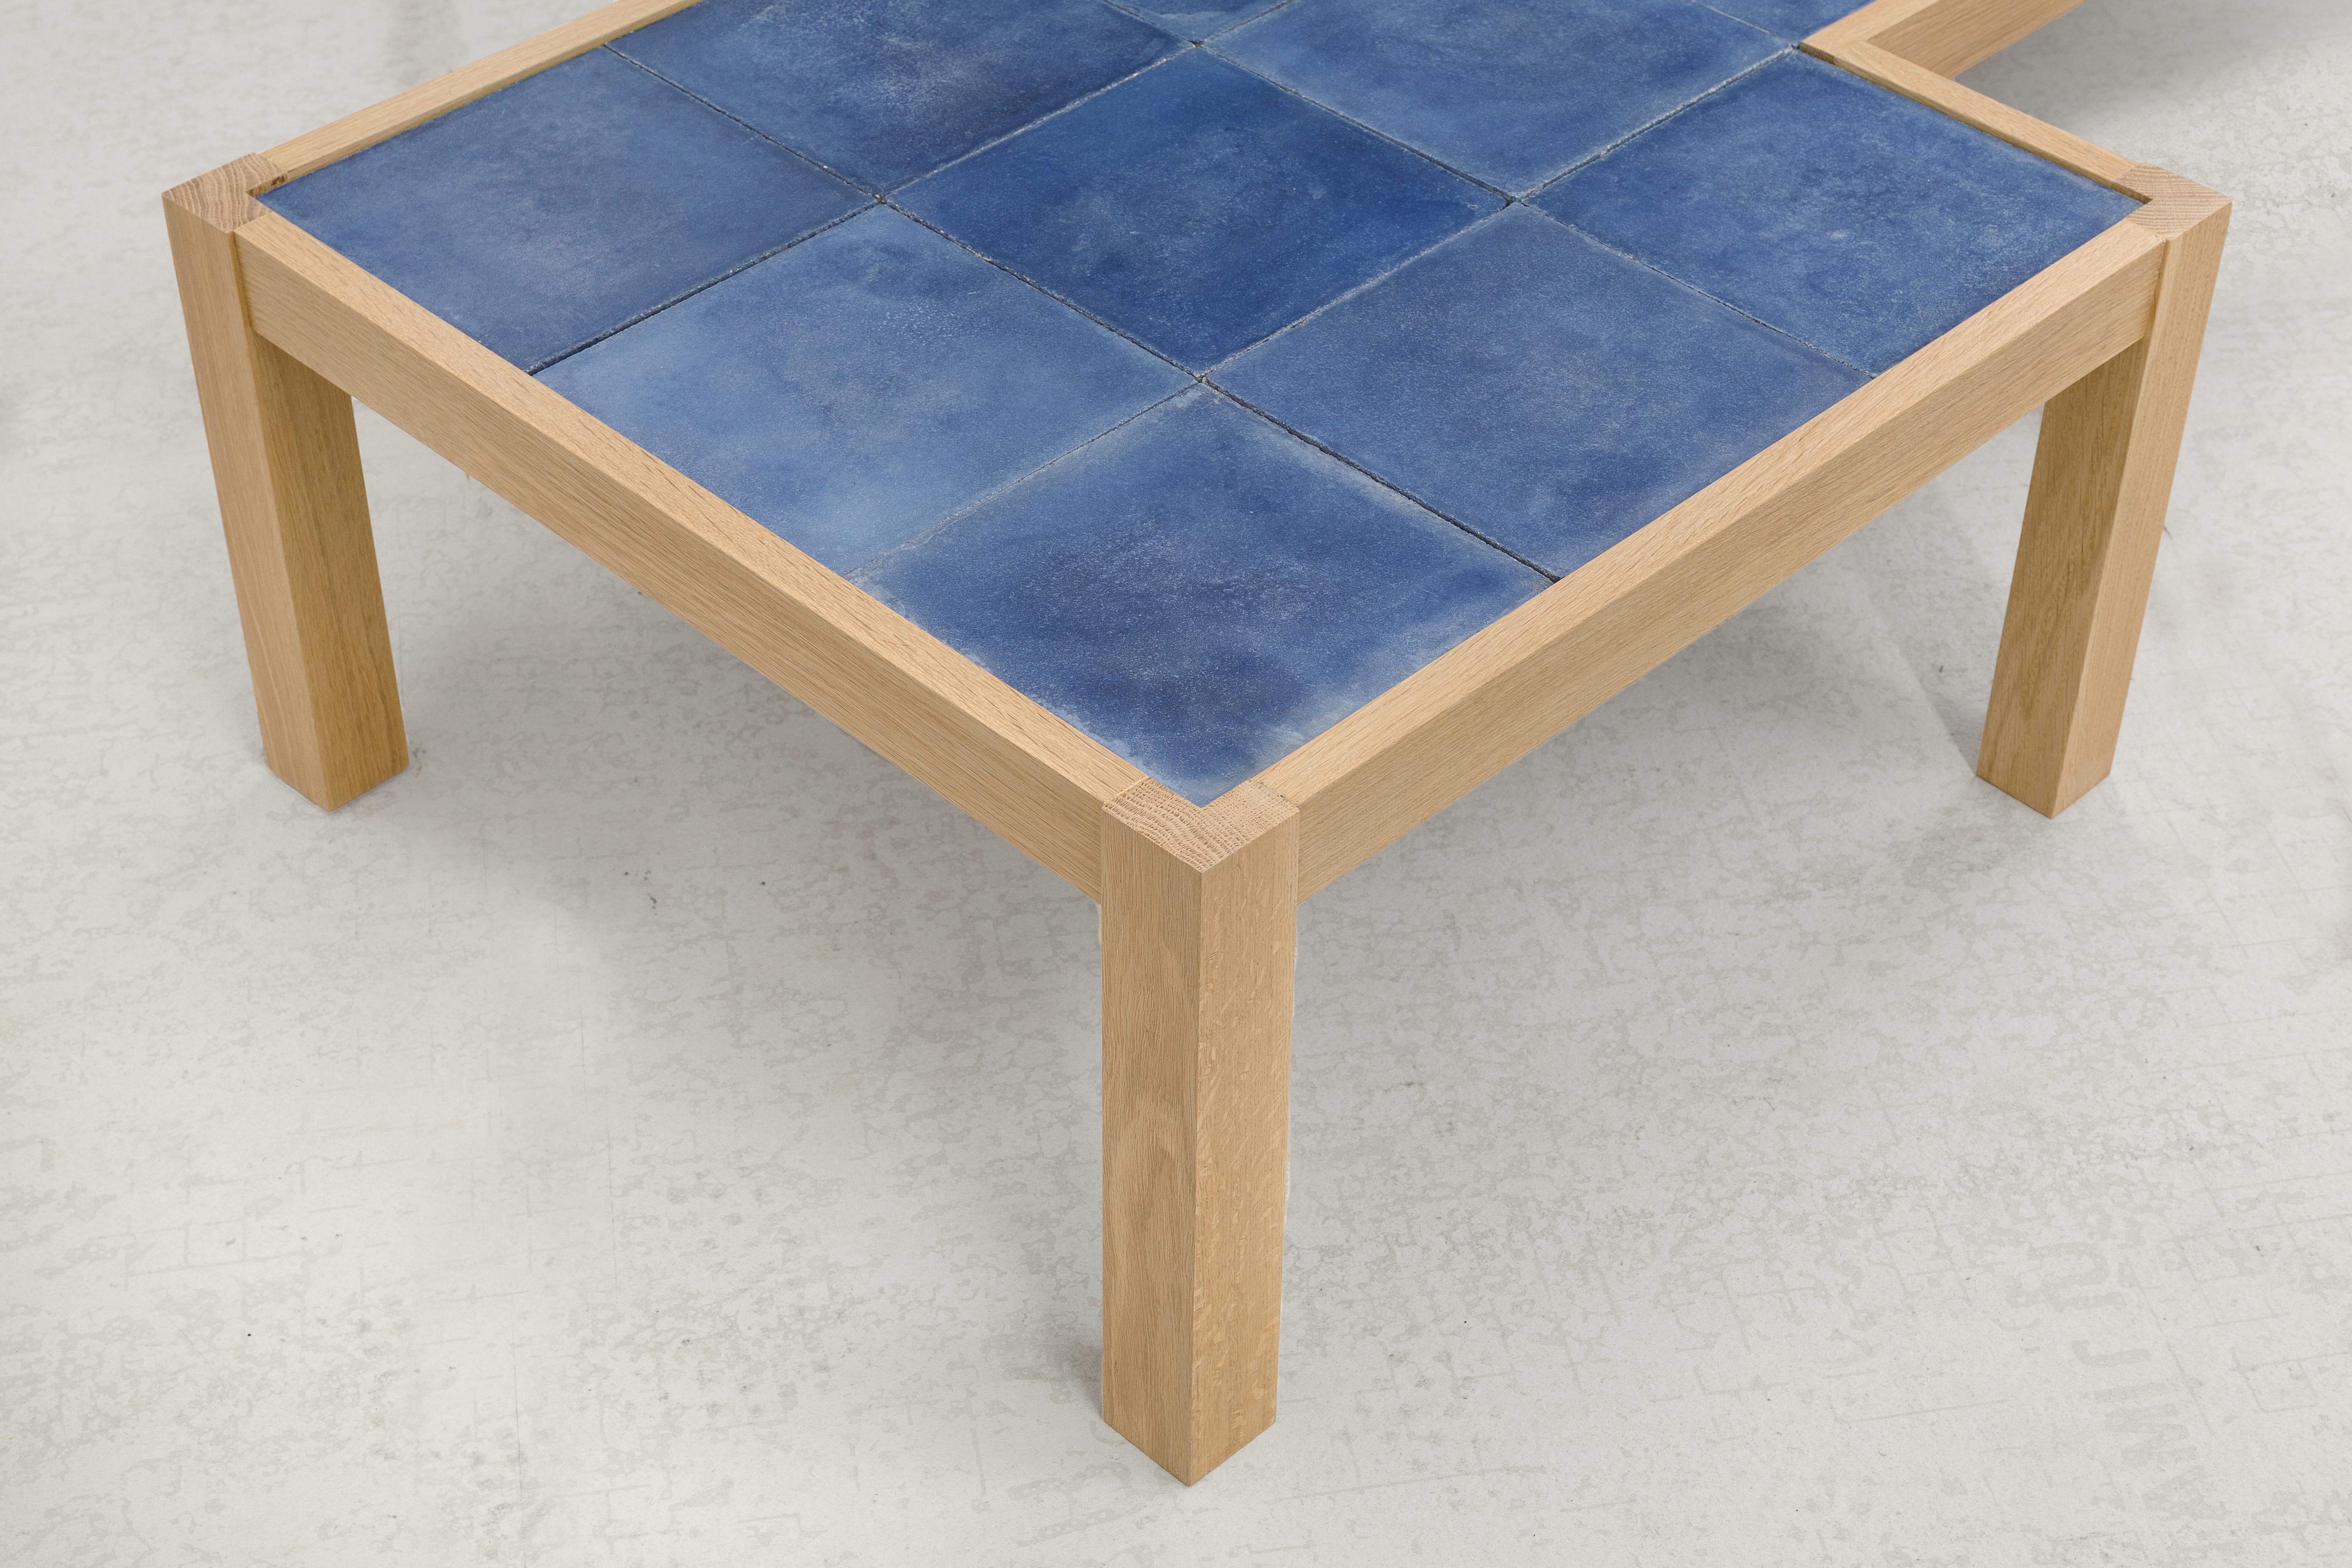 Warm Contemporary Low Table in Natural Oak and Blue Tile by Vivian Carbonell For Sale 1